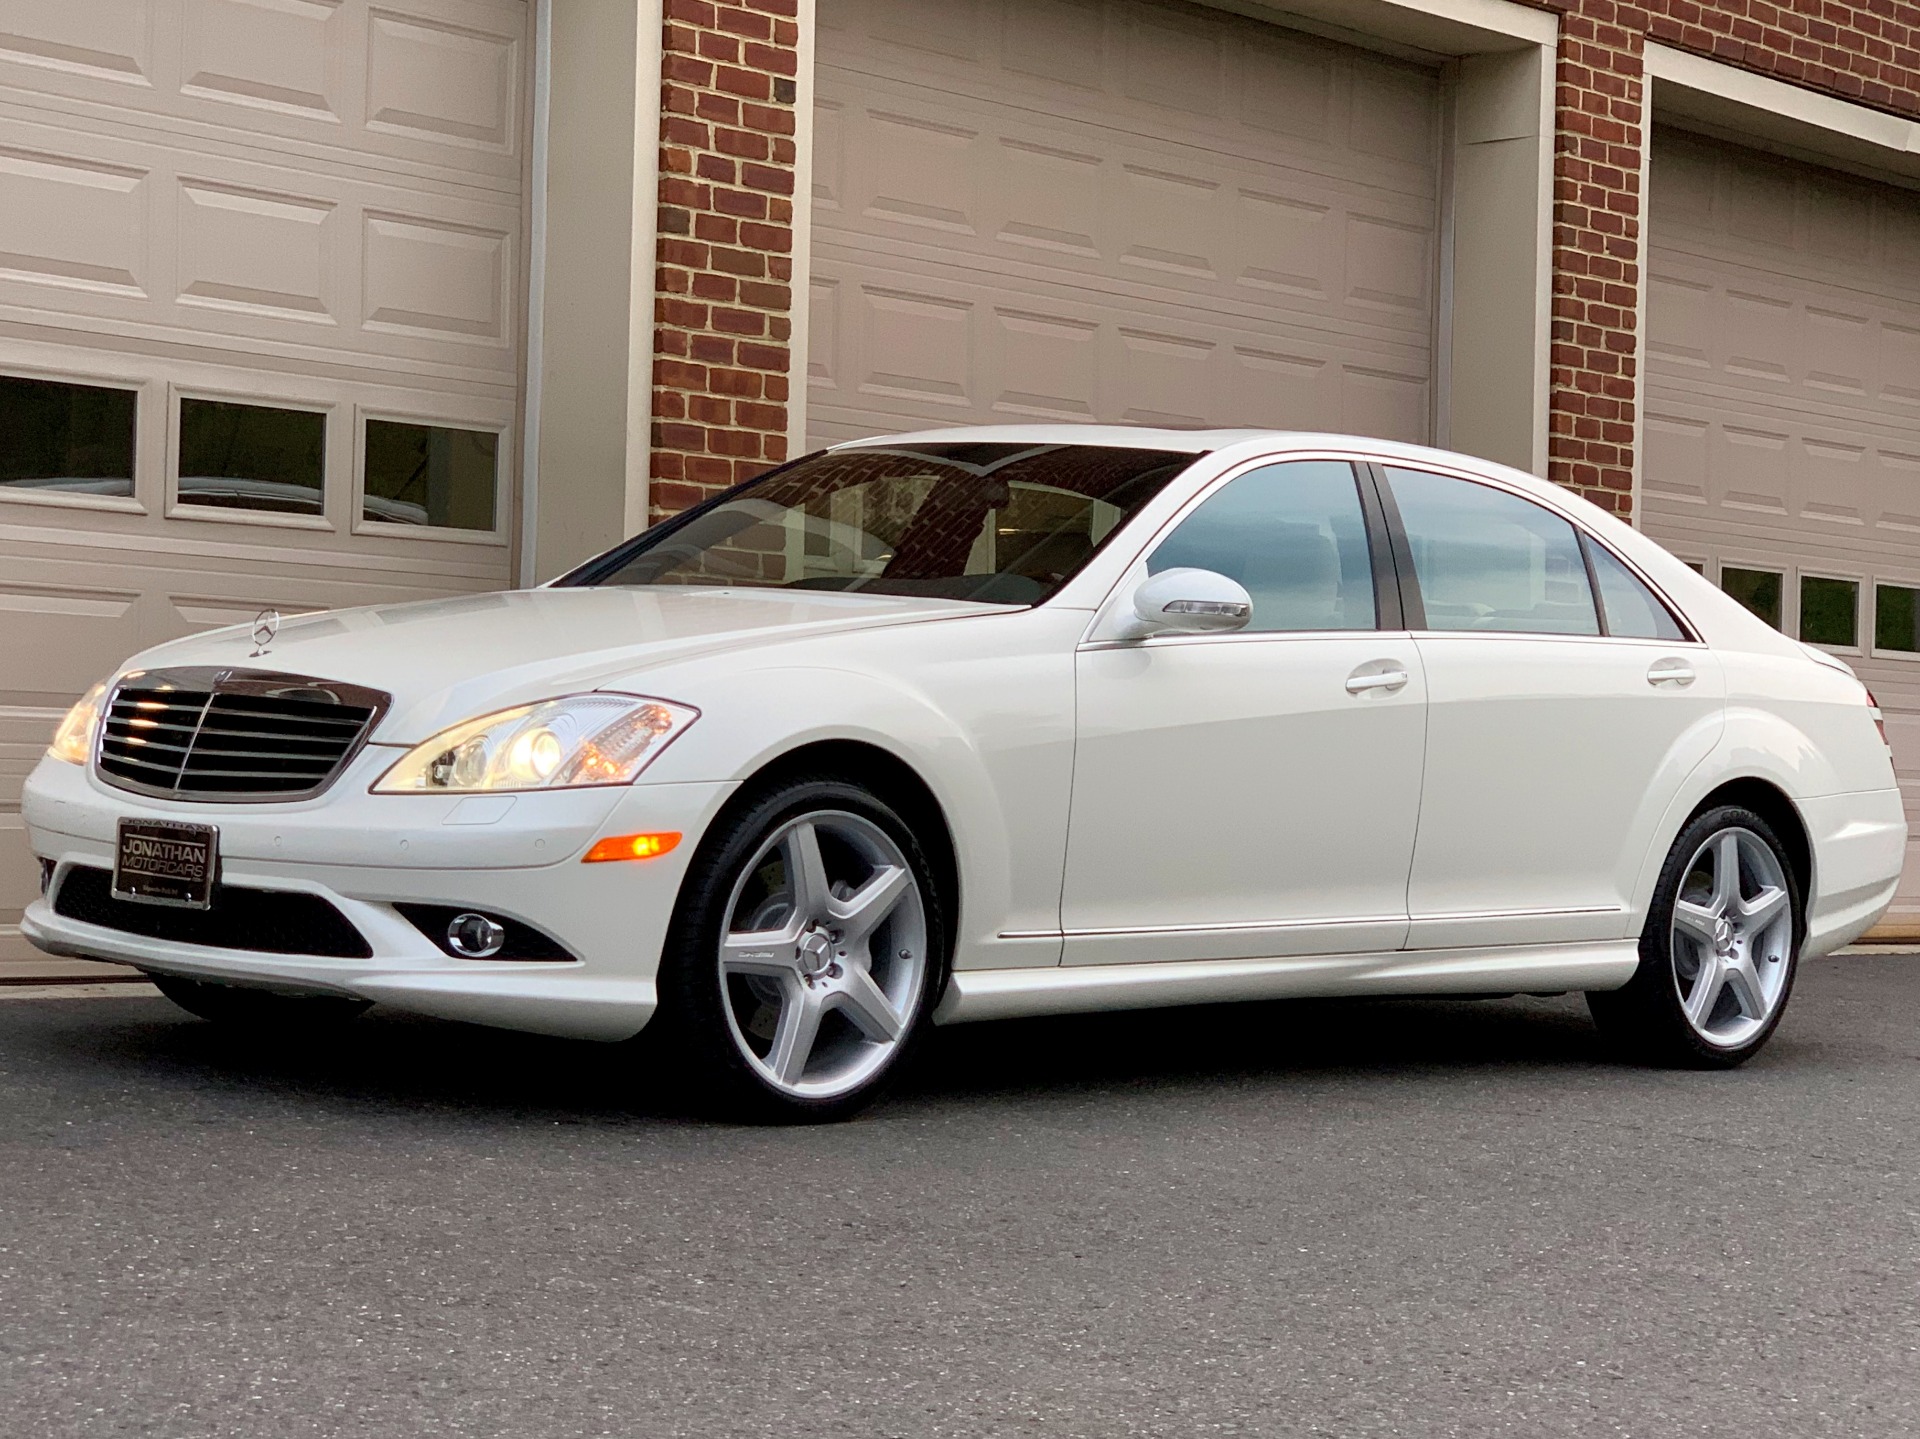 2009 Mercedes Benz S Class S 550 4matic Sport Saks Fifth Avenue Key To The Cure Edition Stock 285648 For Sale Near Edgewater Park Nj Nj Mercedes Benz Dealer